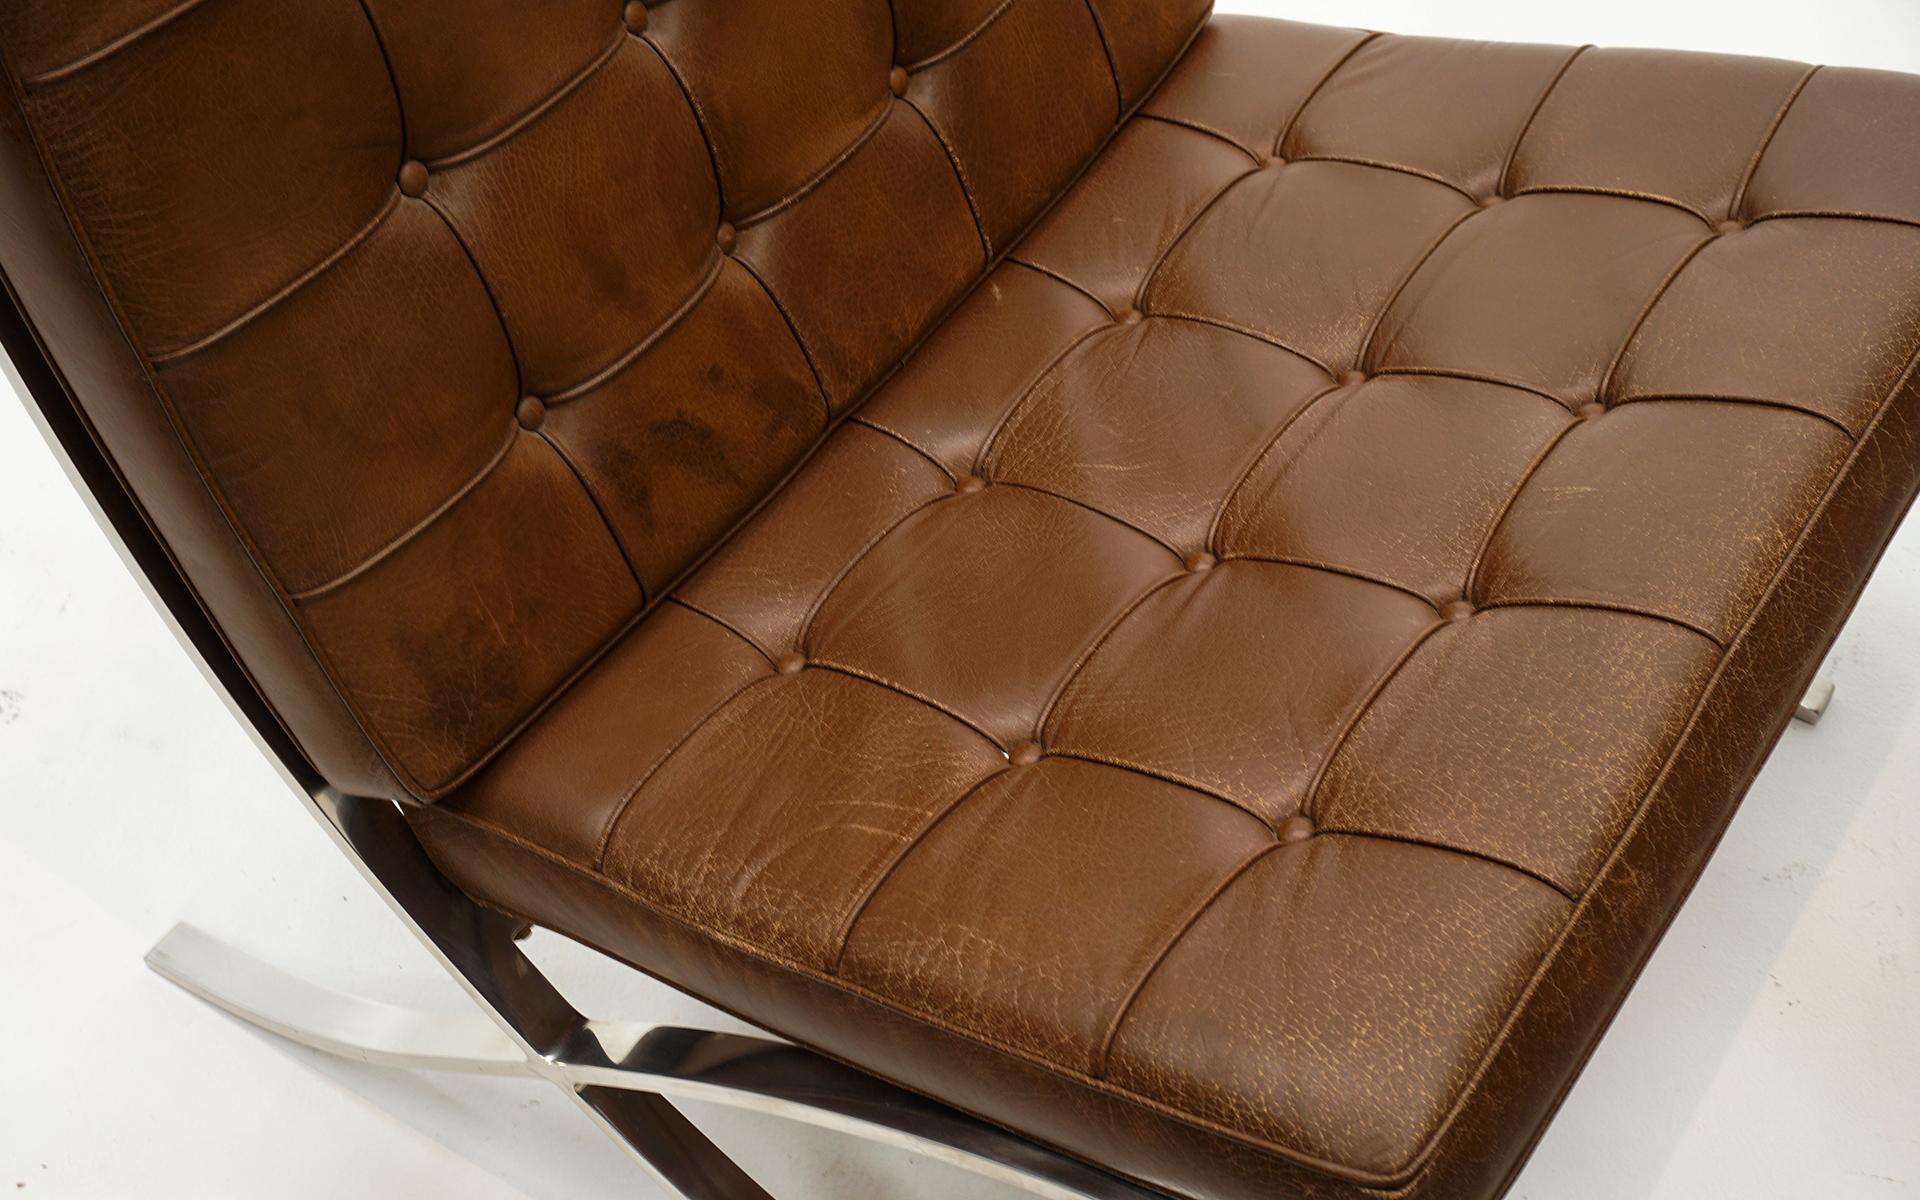 Stainless Steel Early Barcelona Chairs by Mies van Der Rohe for Knoll. Brown Leather & Stainless